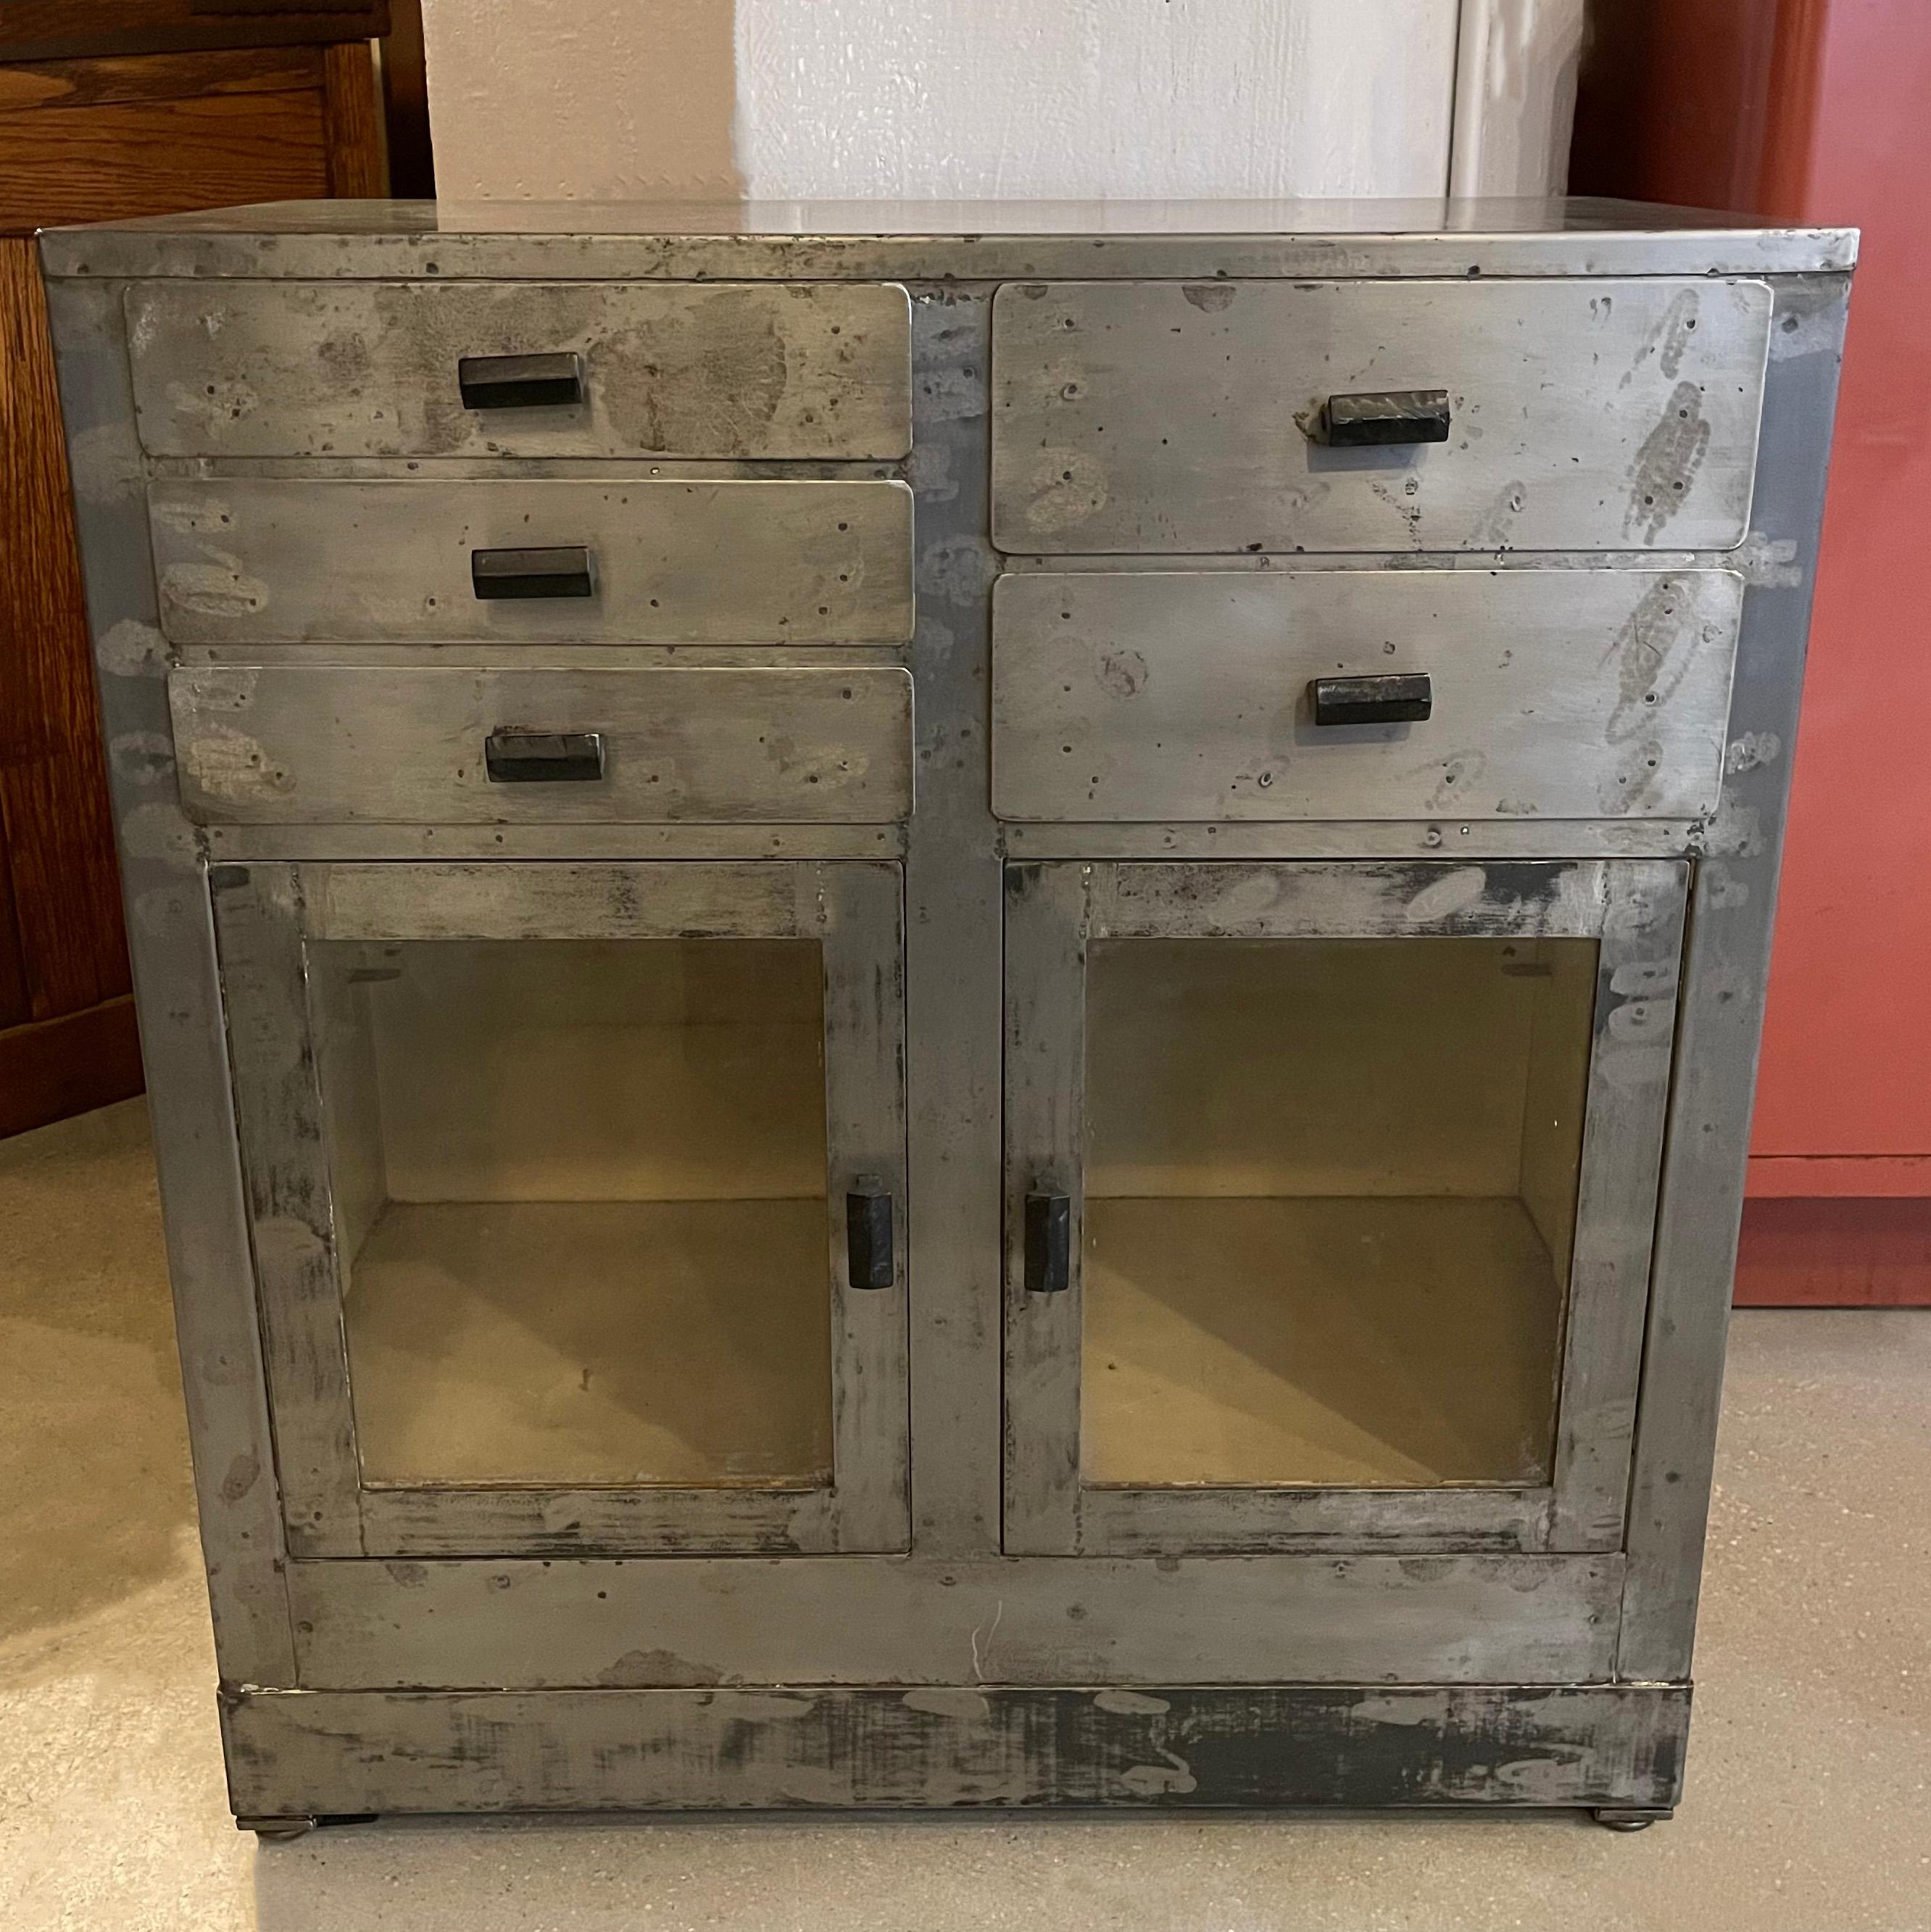 Early 20th century, industrial, deco period, brushed steel, apothecary, medicine cabinet, nurse station features top drawers and glass front bottom doors with painted interior. The black handles are Bakelite. The brushed steel exterior shows a